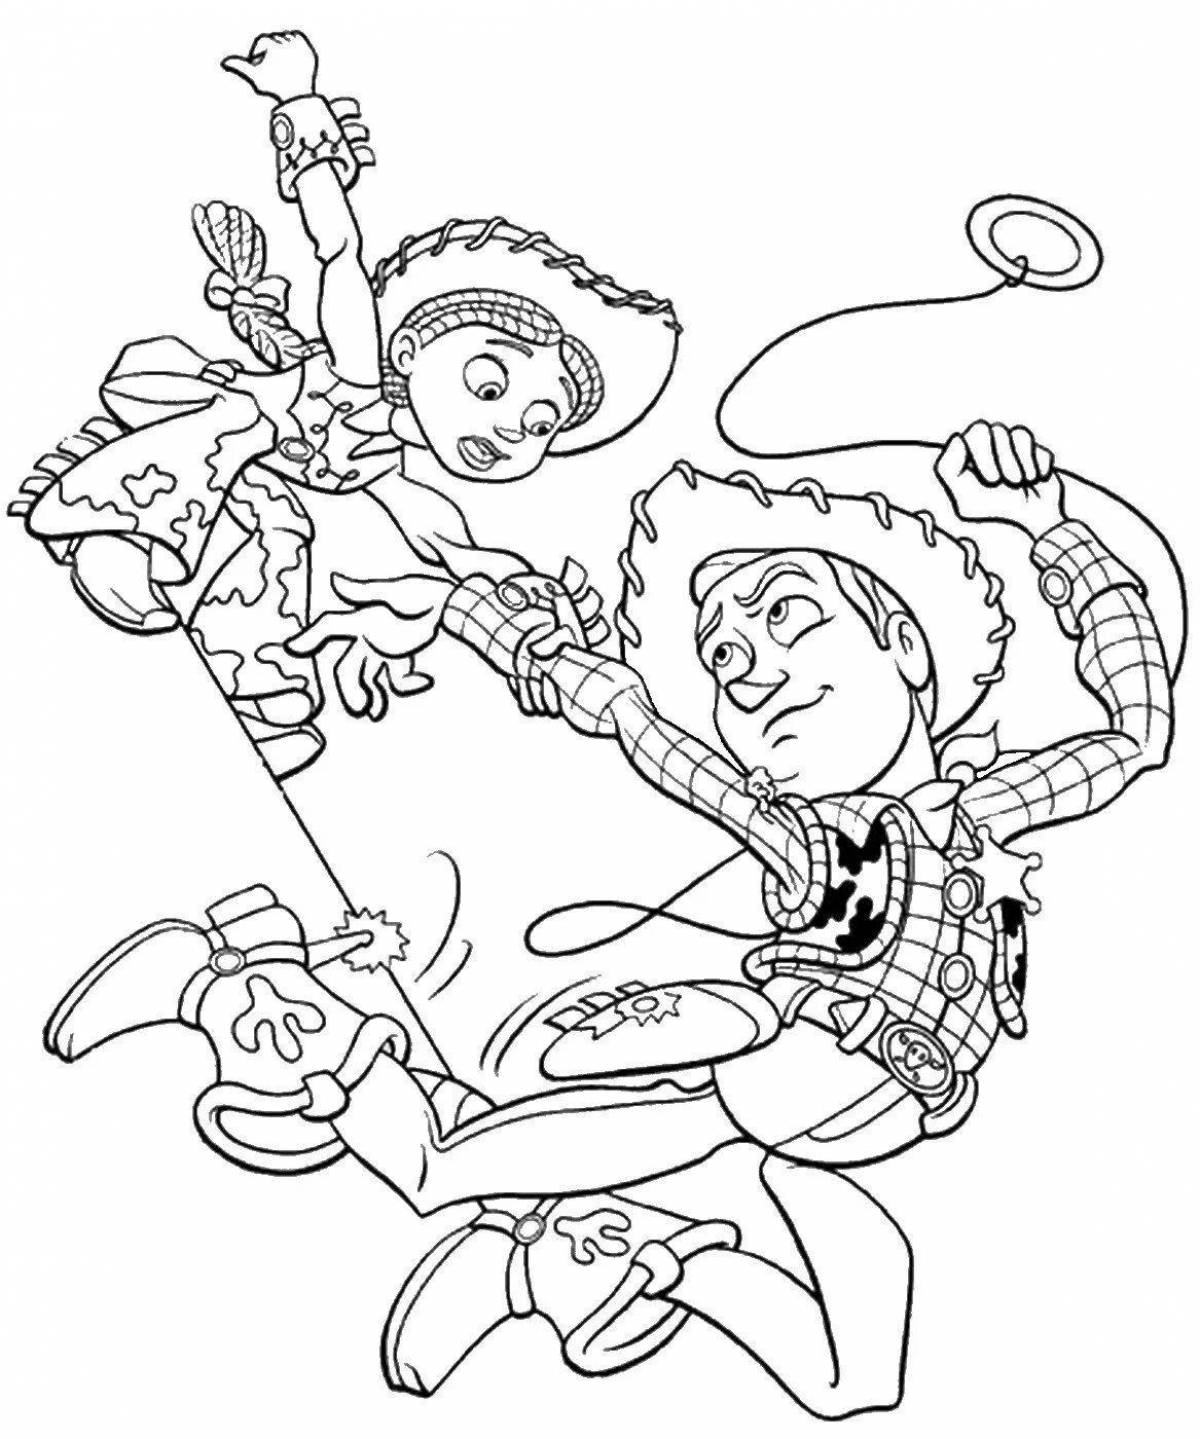 Coloring page charming gosha and the world